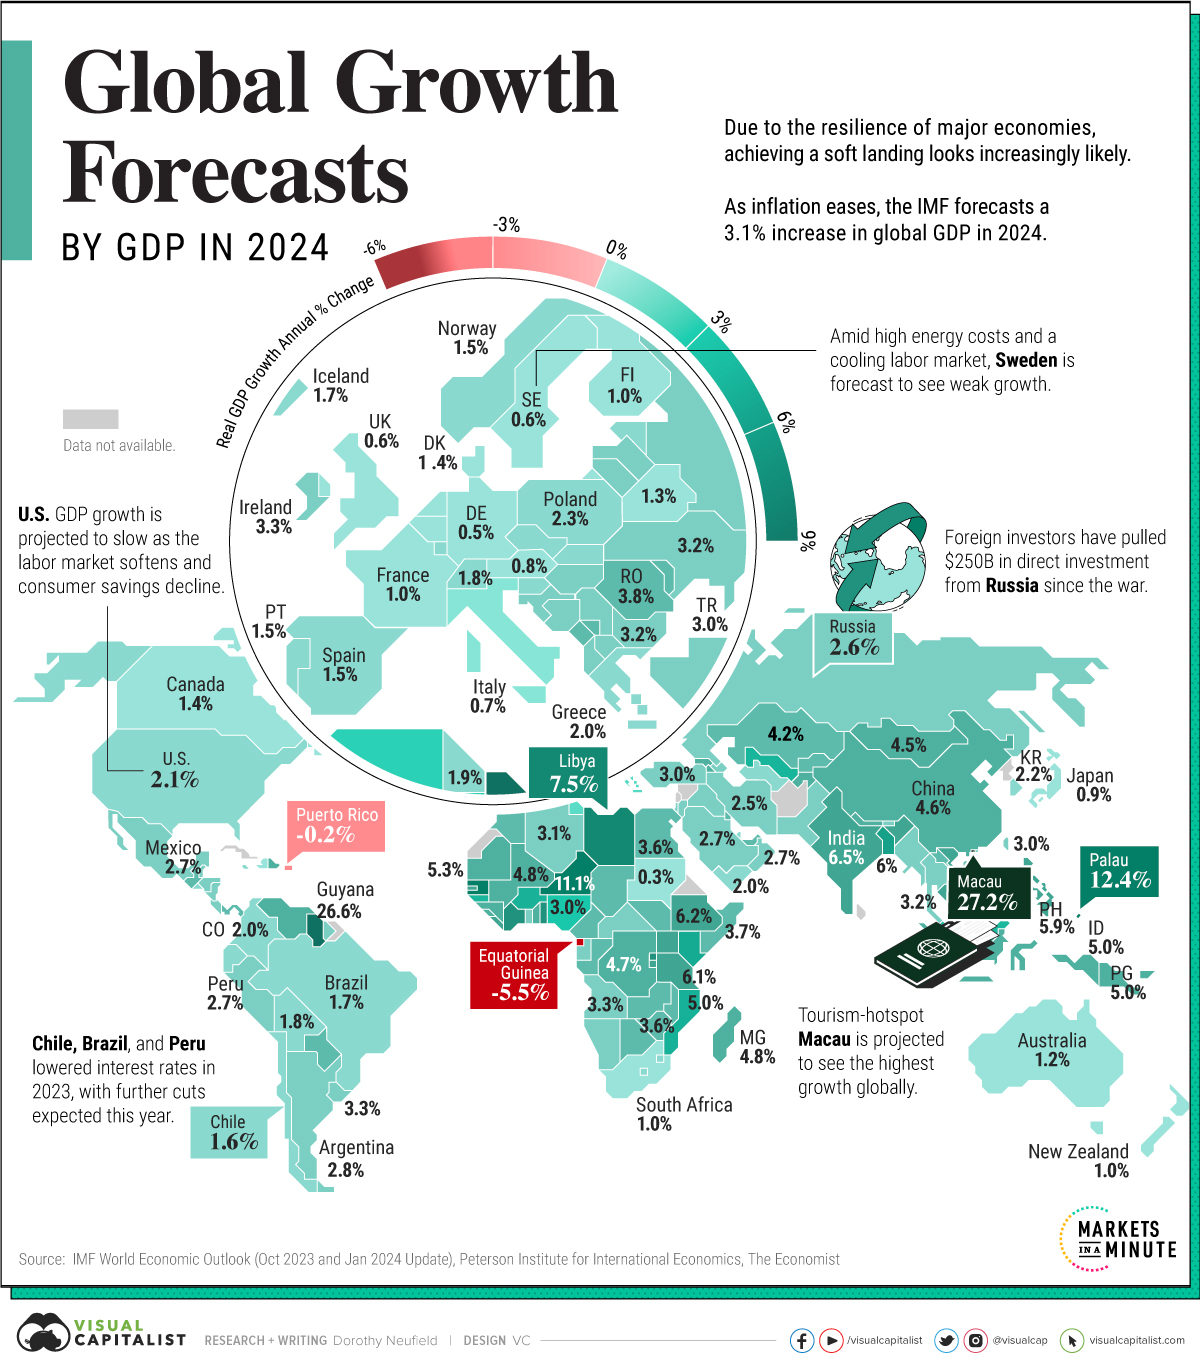 This map shows GDP growth projections in 2024.